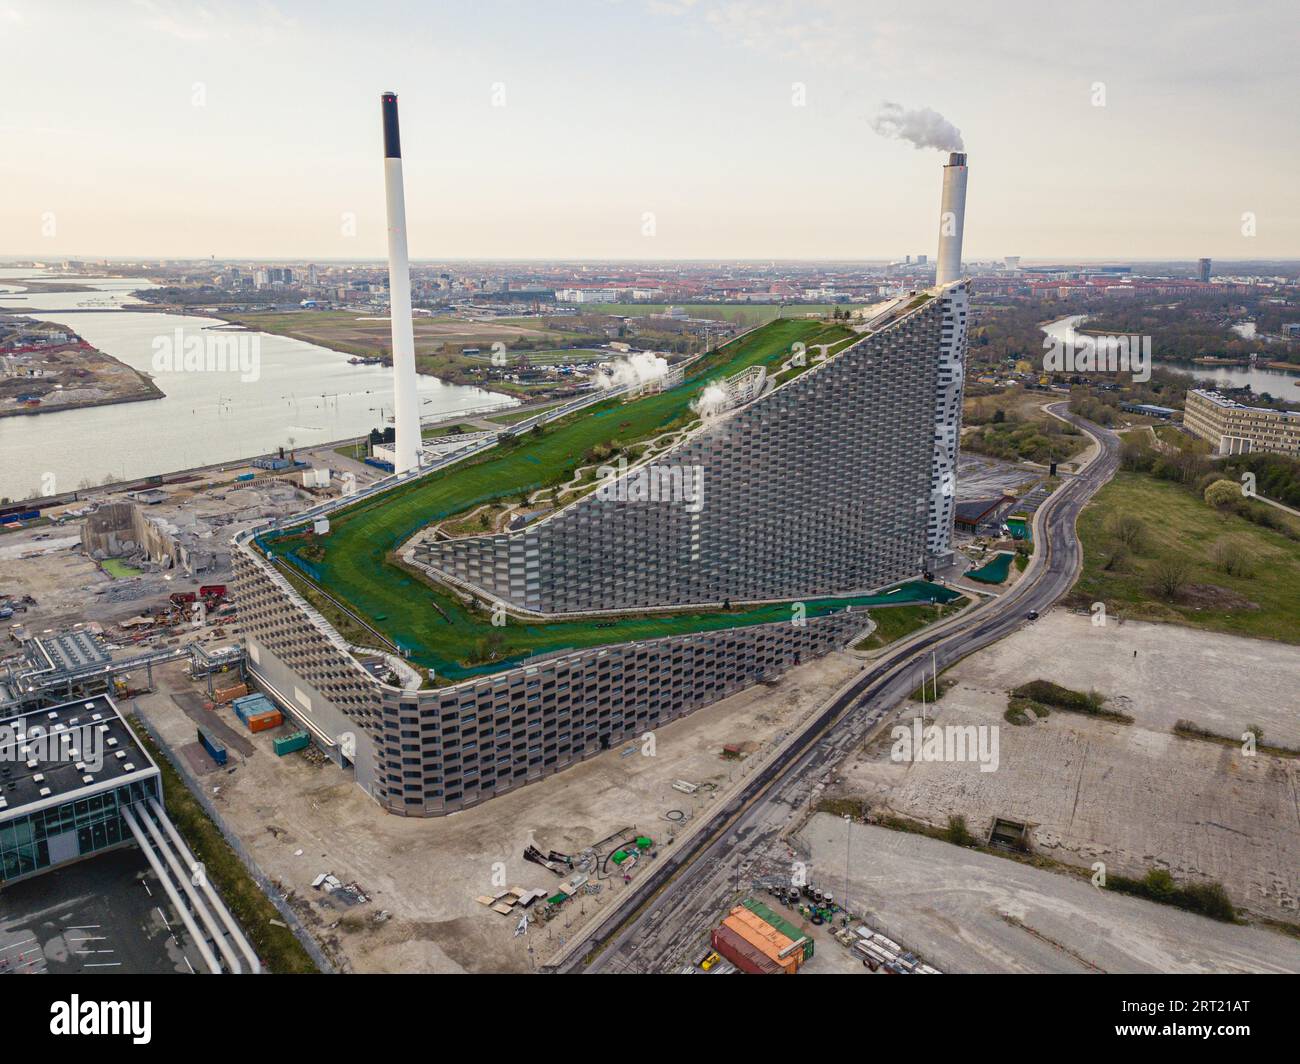 Copenhagen, Denmark, April 12, 2020: Aerial drone view of Amager Bakke, a waste to power plant with a ski slope on top Stock Photo